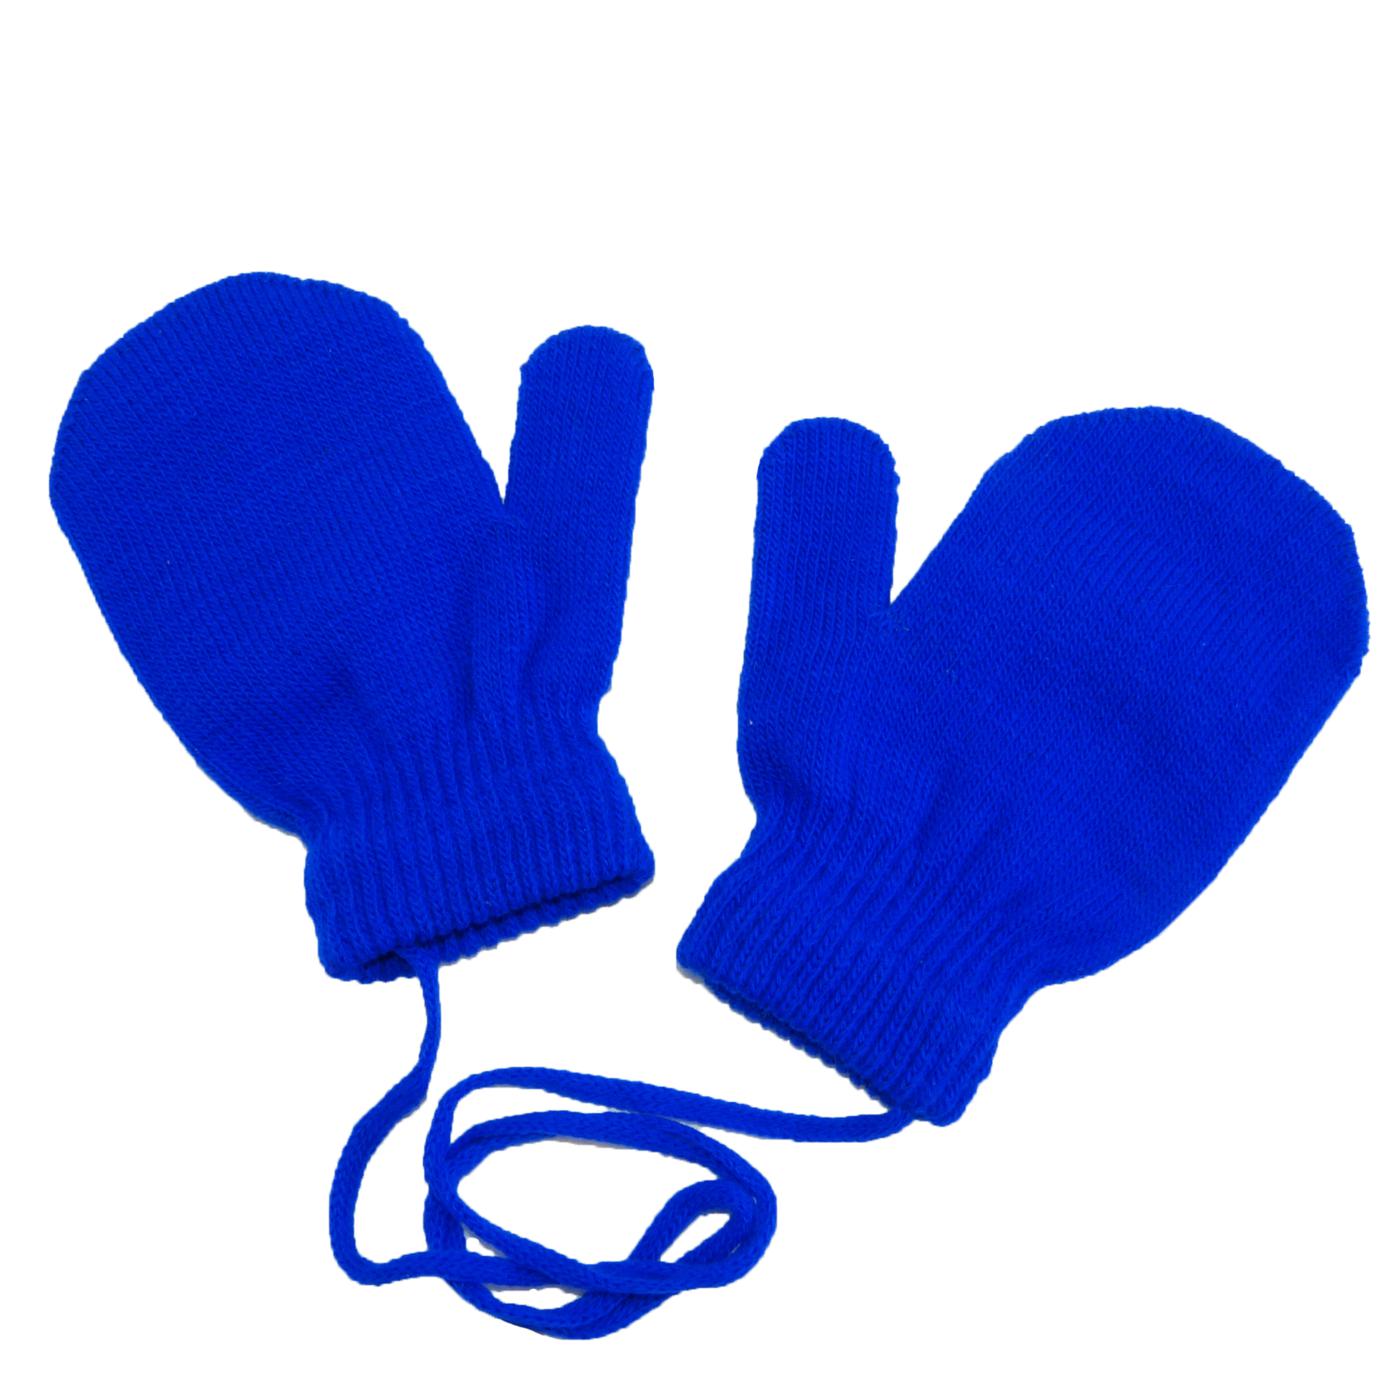 hat and gloves clip art - photo #36